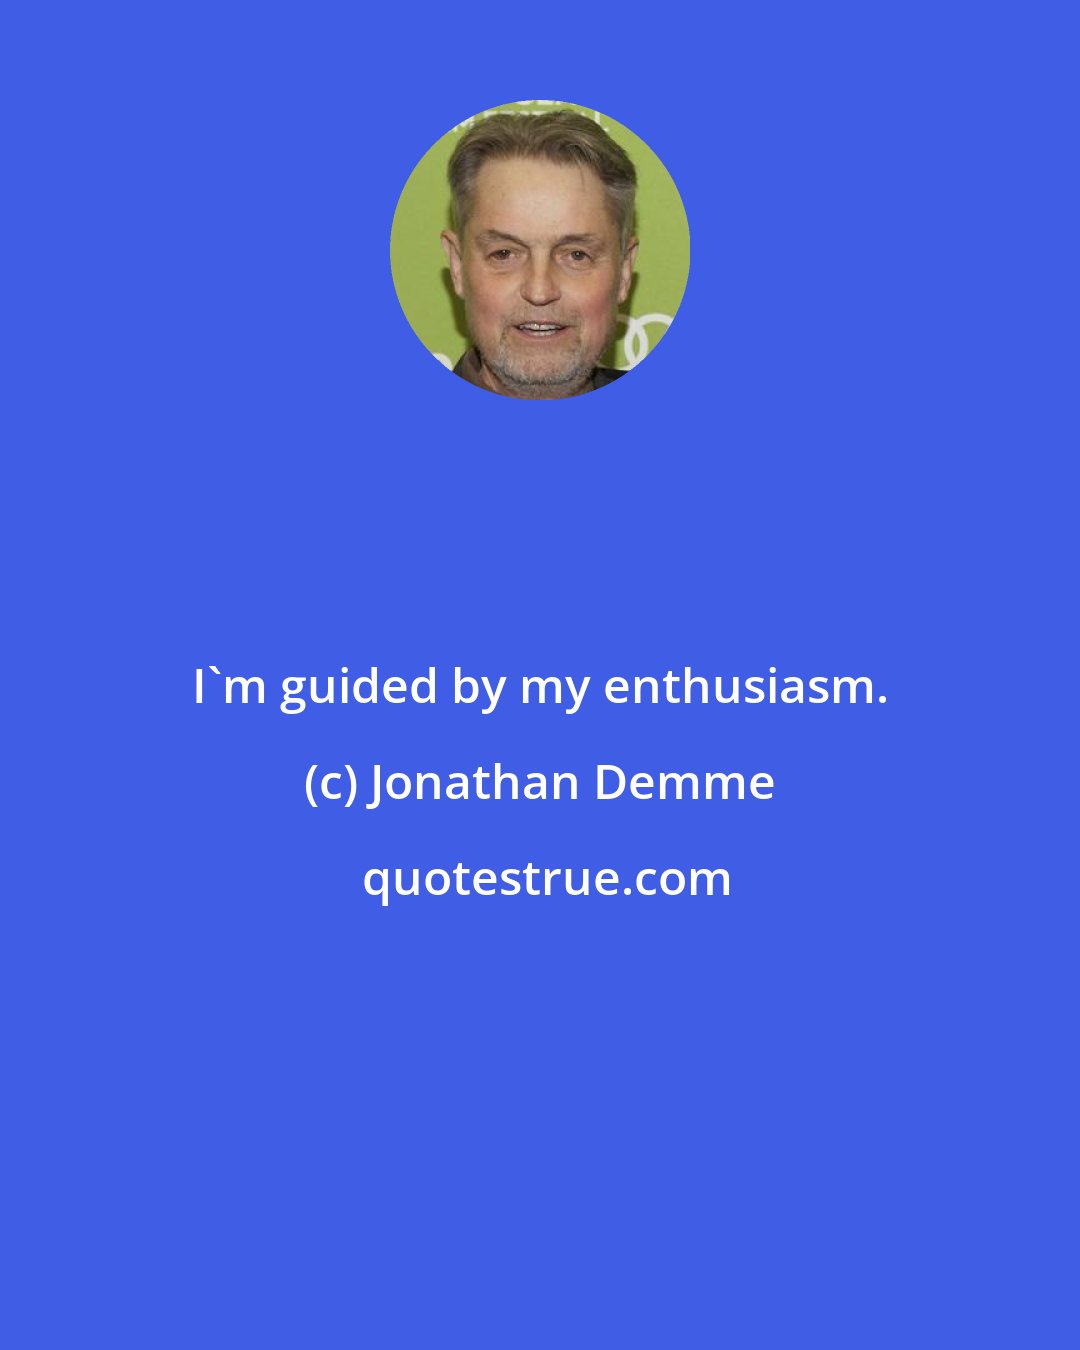 Jonathan Demme: I'm guided by my enthusiasm.